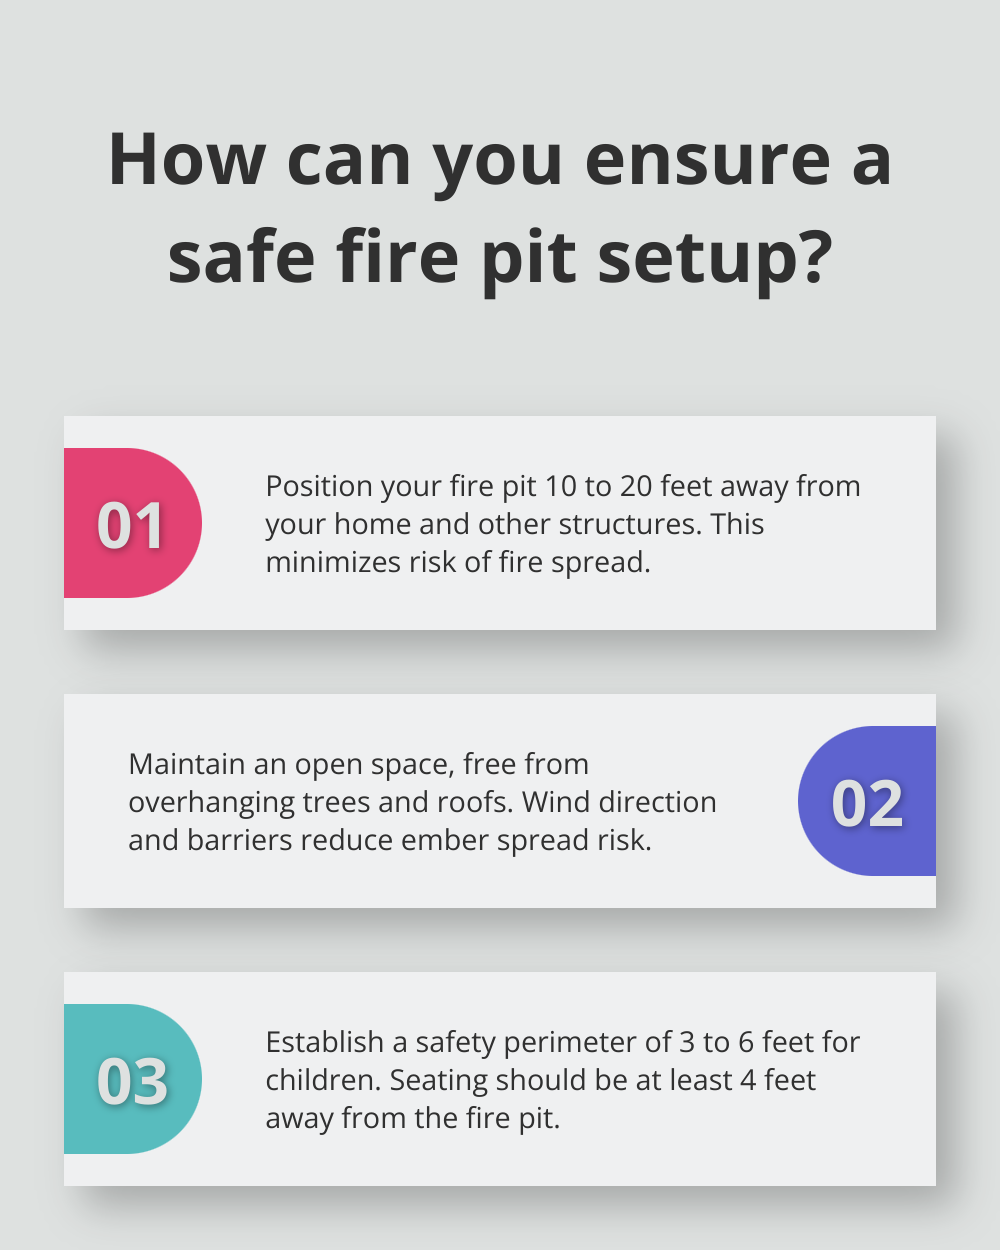 Fact - How can you ensure a safe fire pit setup?